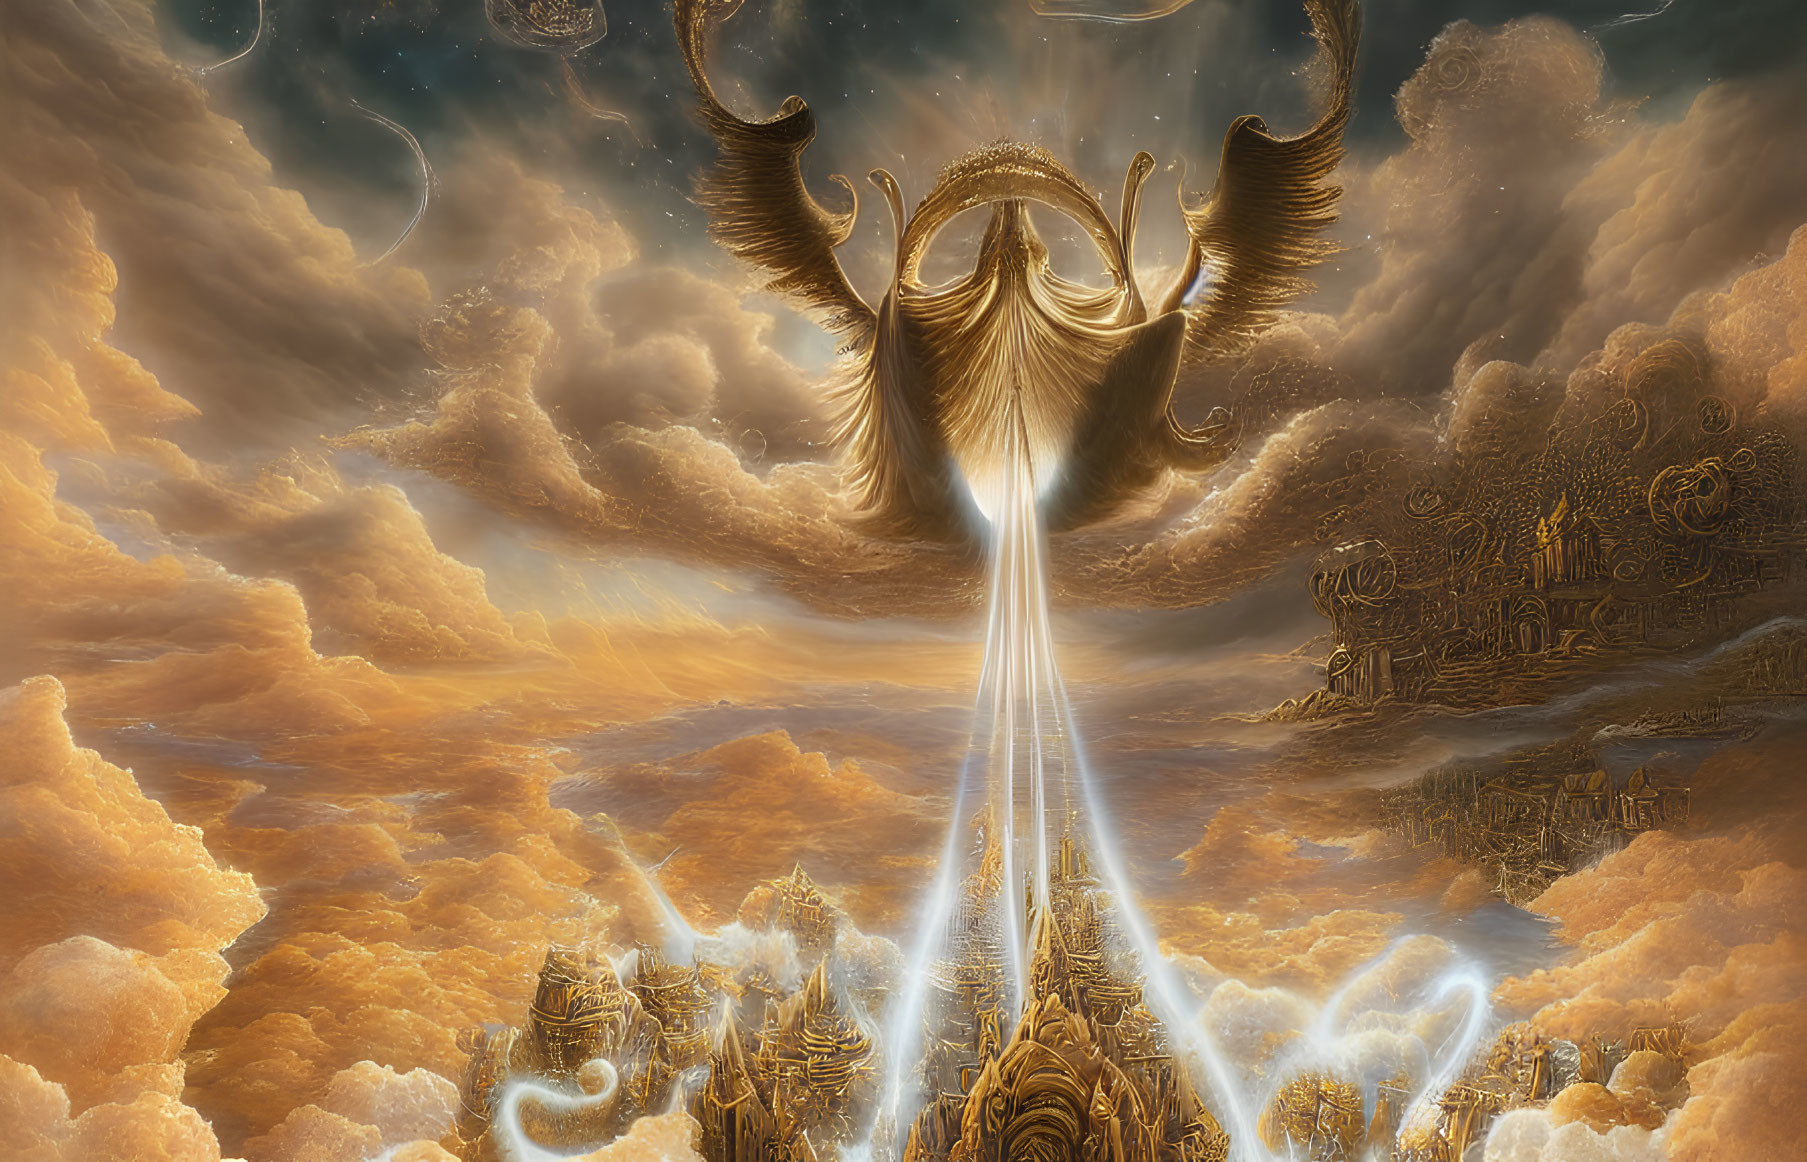 Majestic celestial scene with golden clouds and ethereal figure